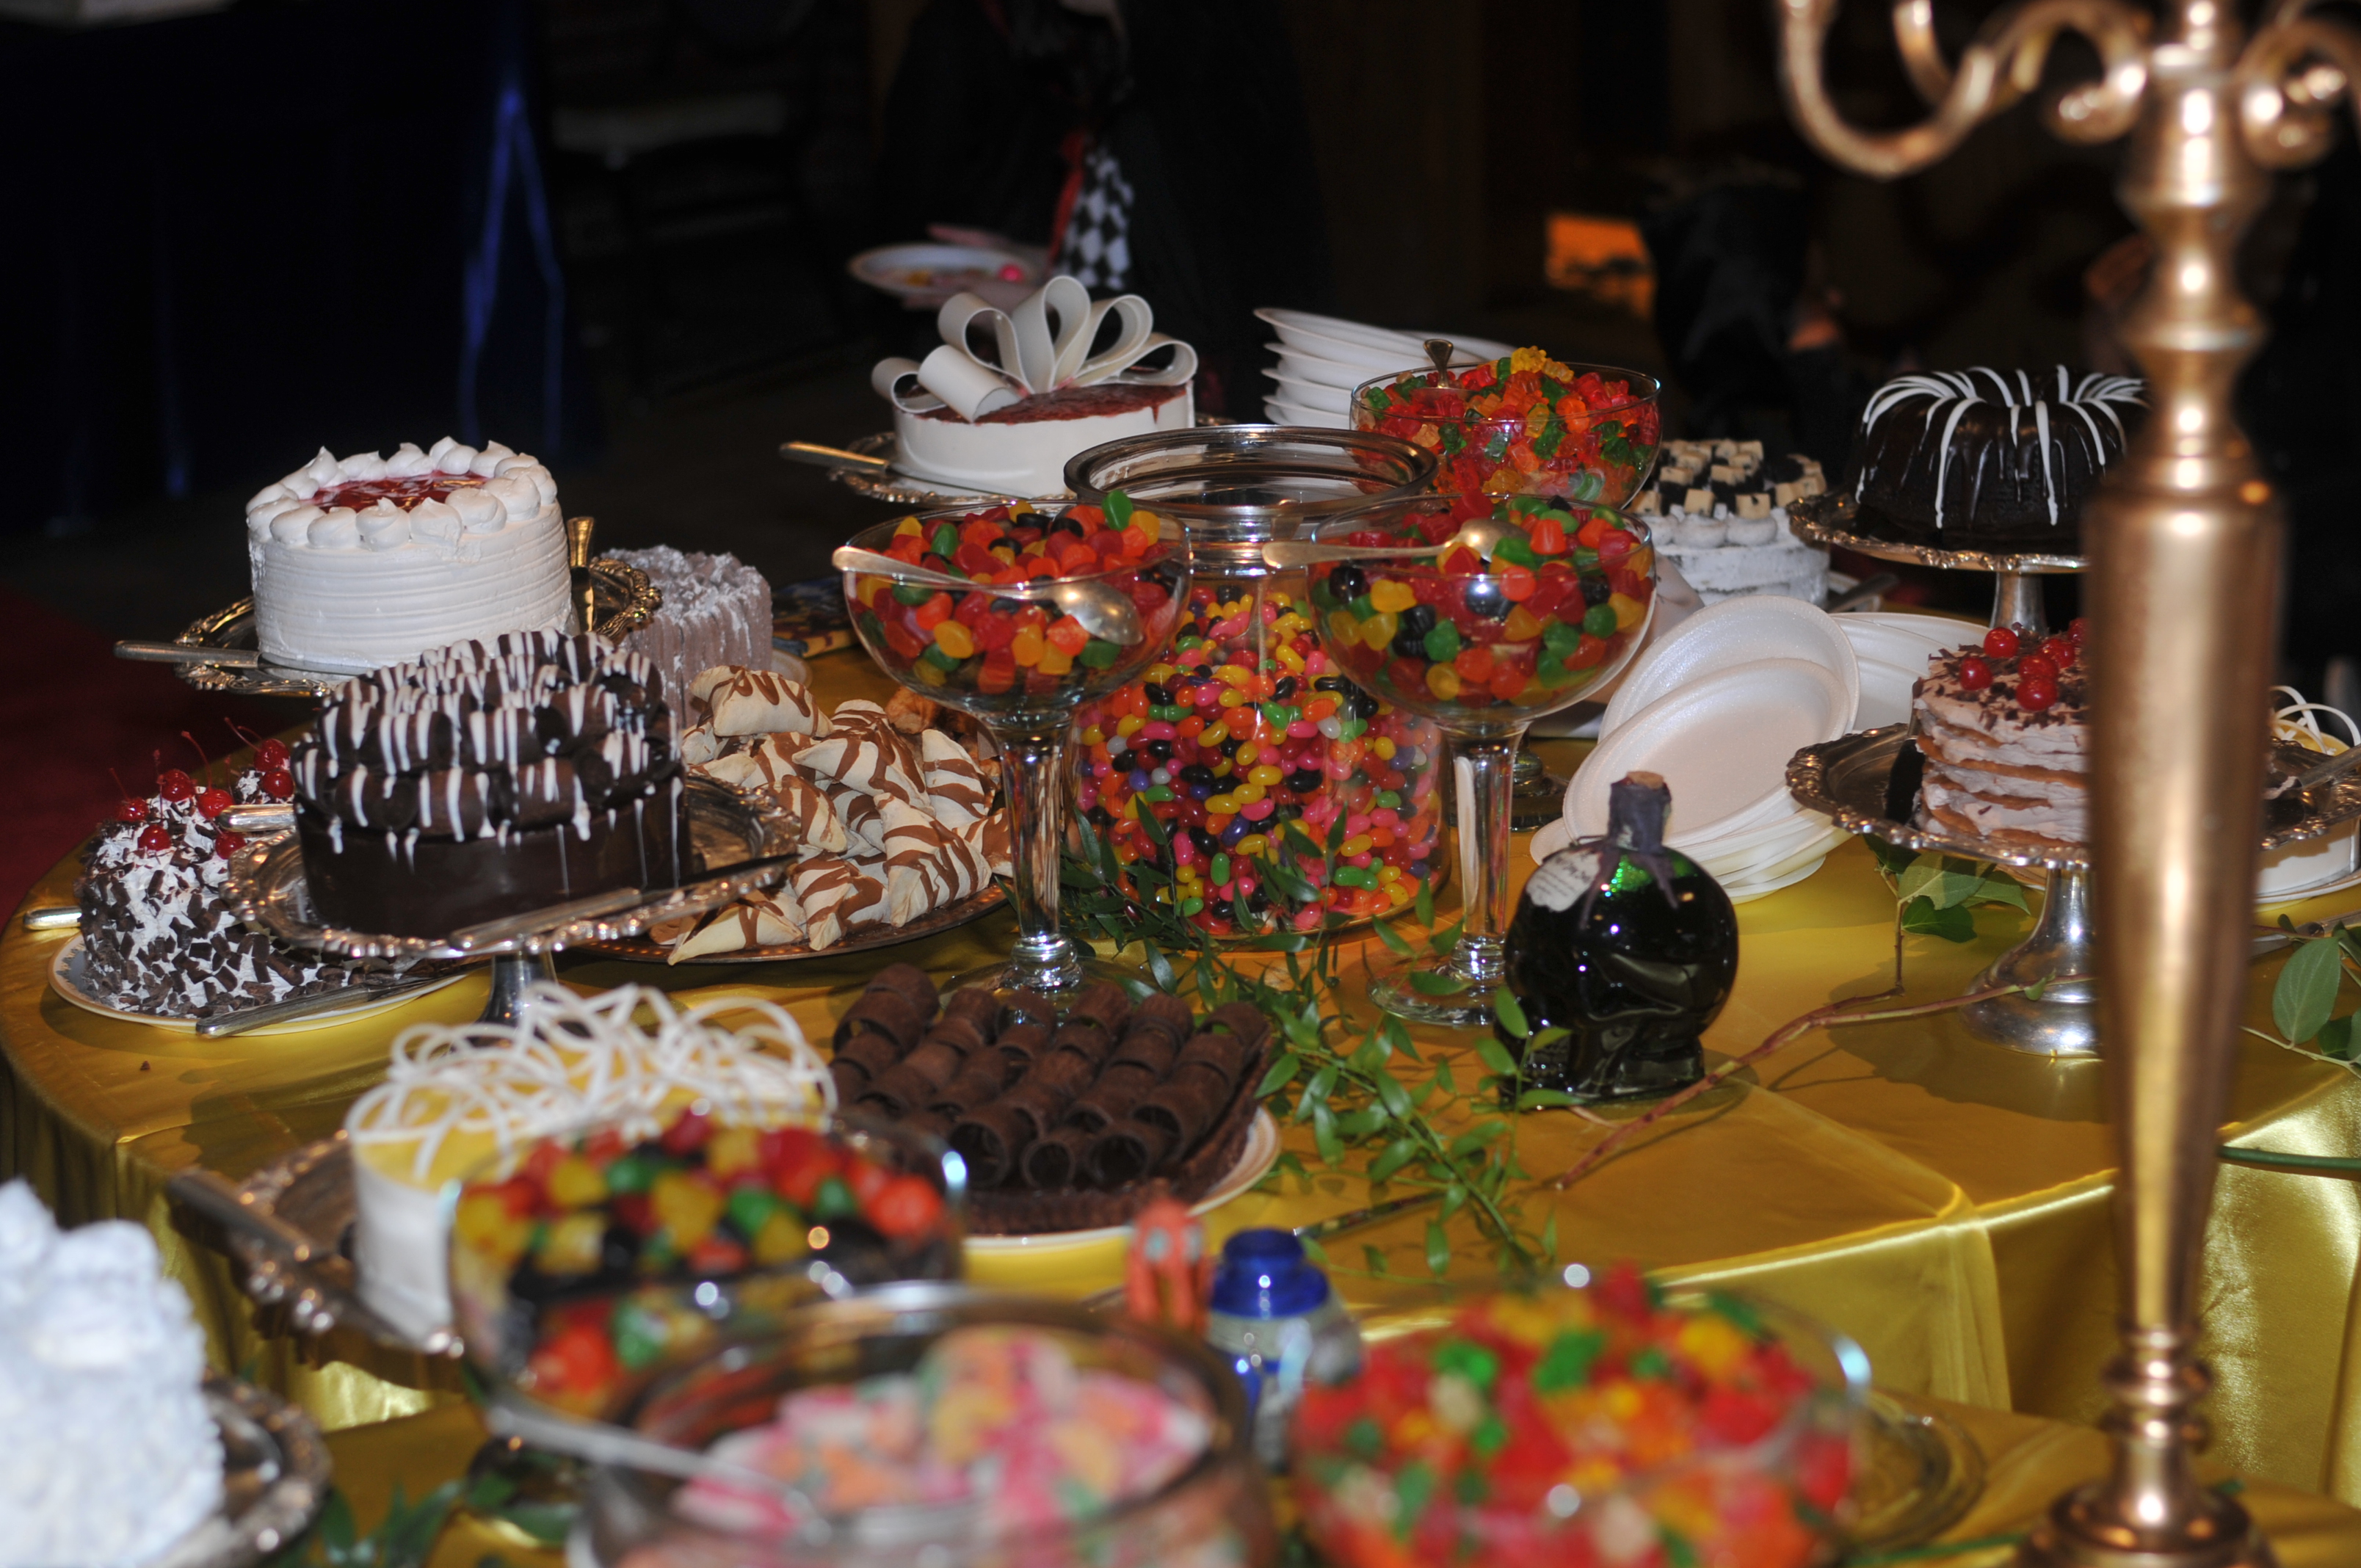 Dessert Table with Cakes and Candy